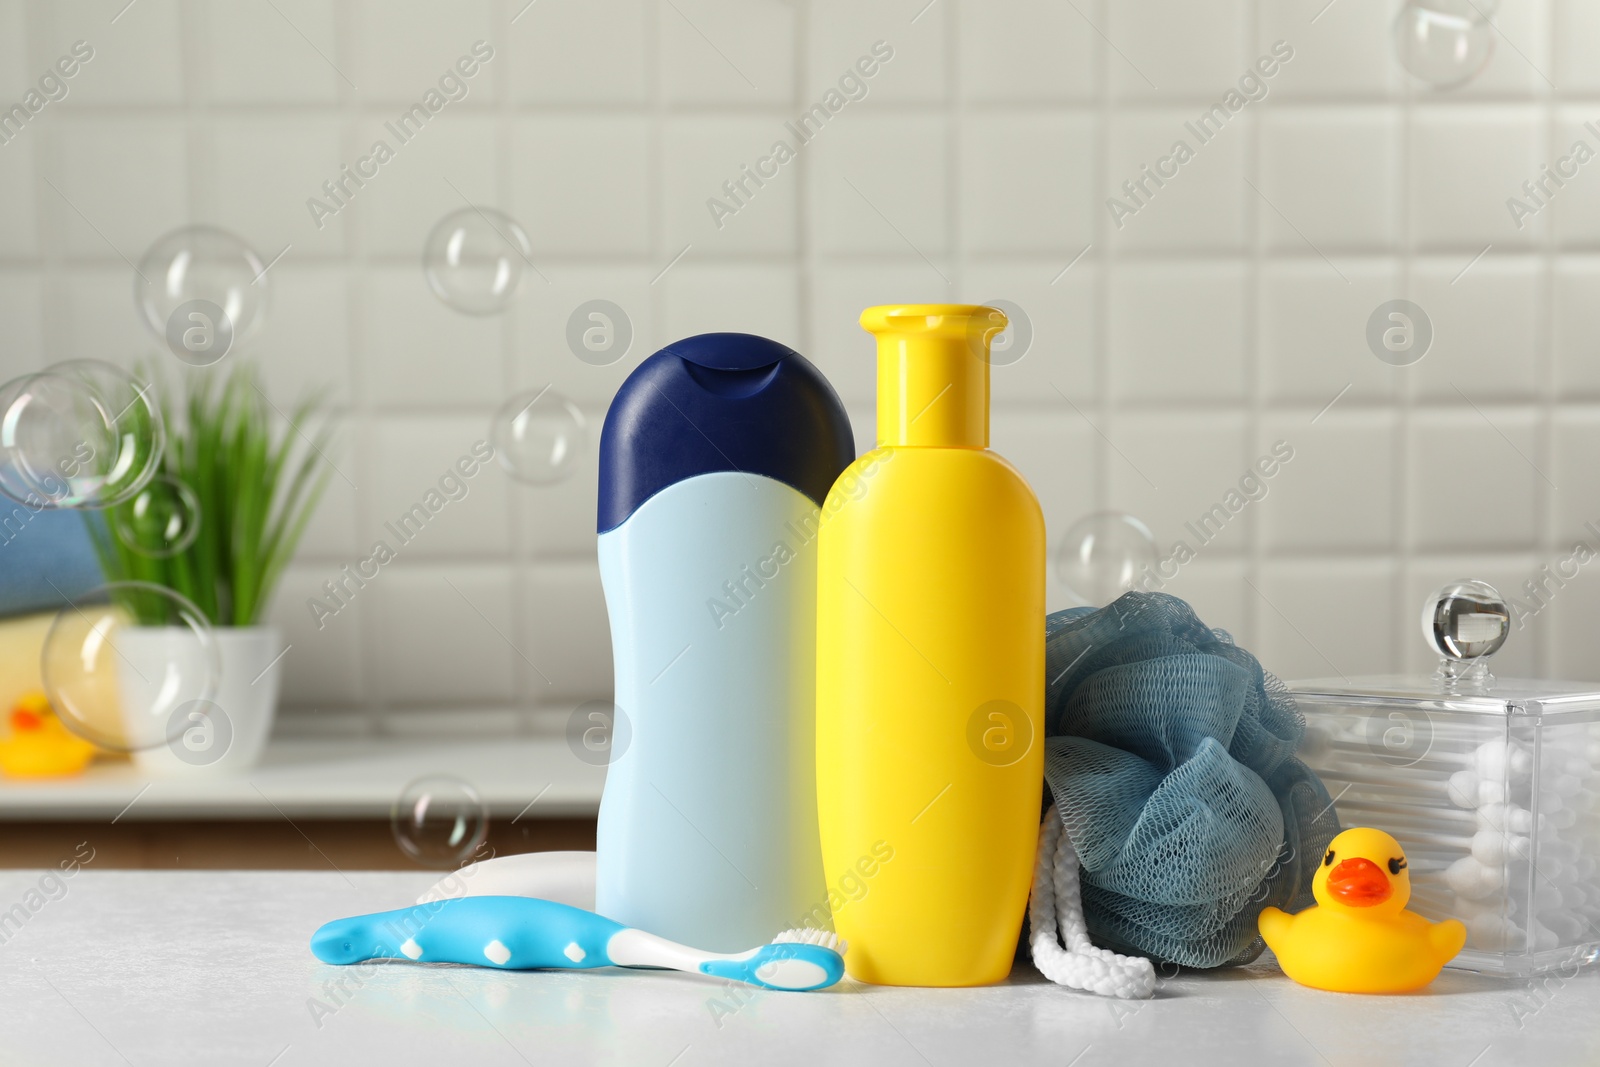 Photo of Baby cosmetic products, bath duck, toothbrush and sponge on white table against soap bubbles